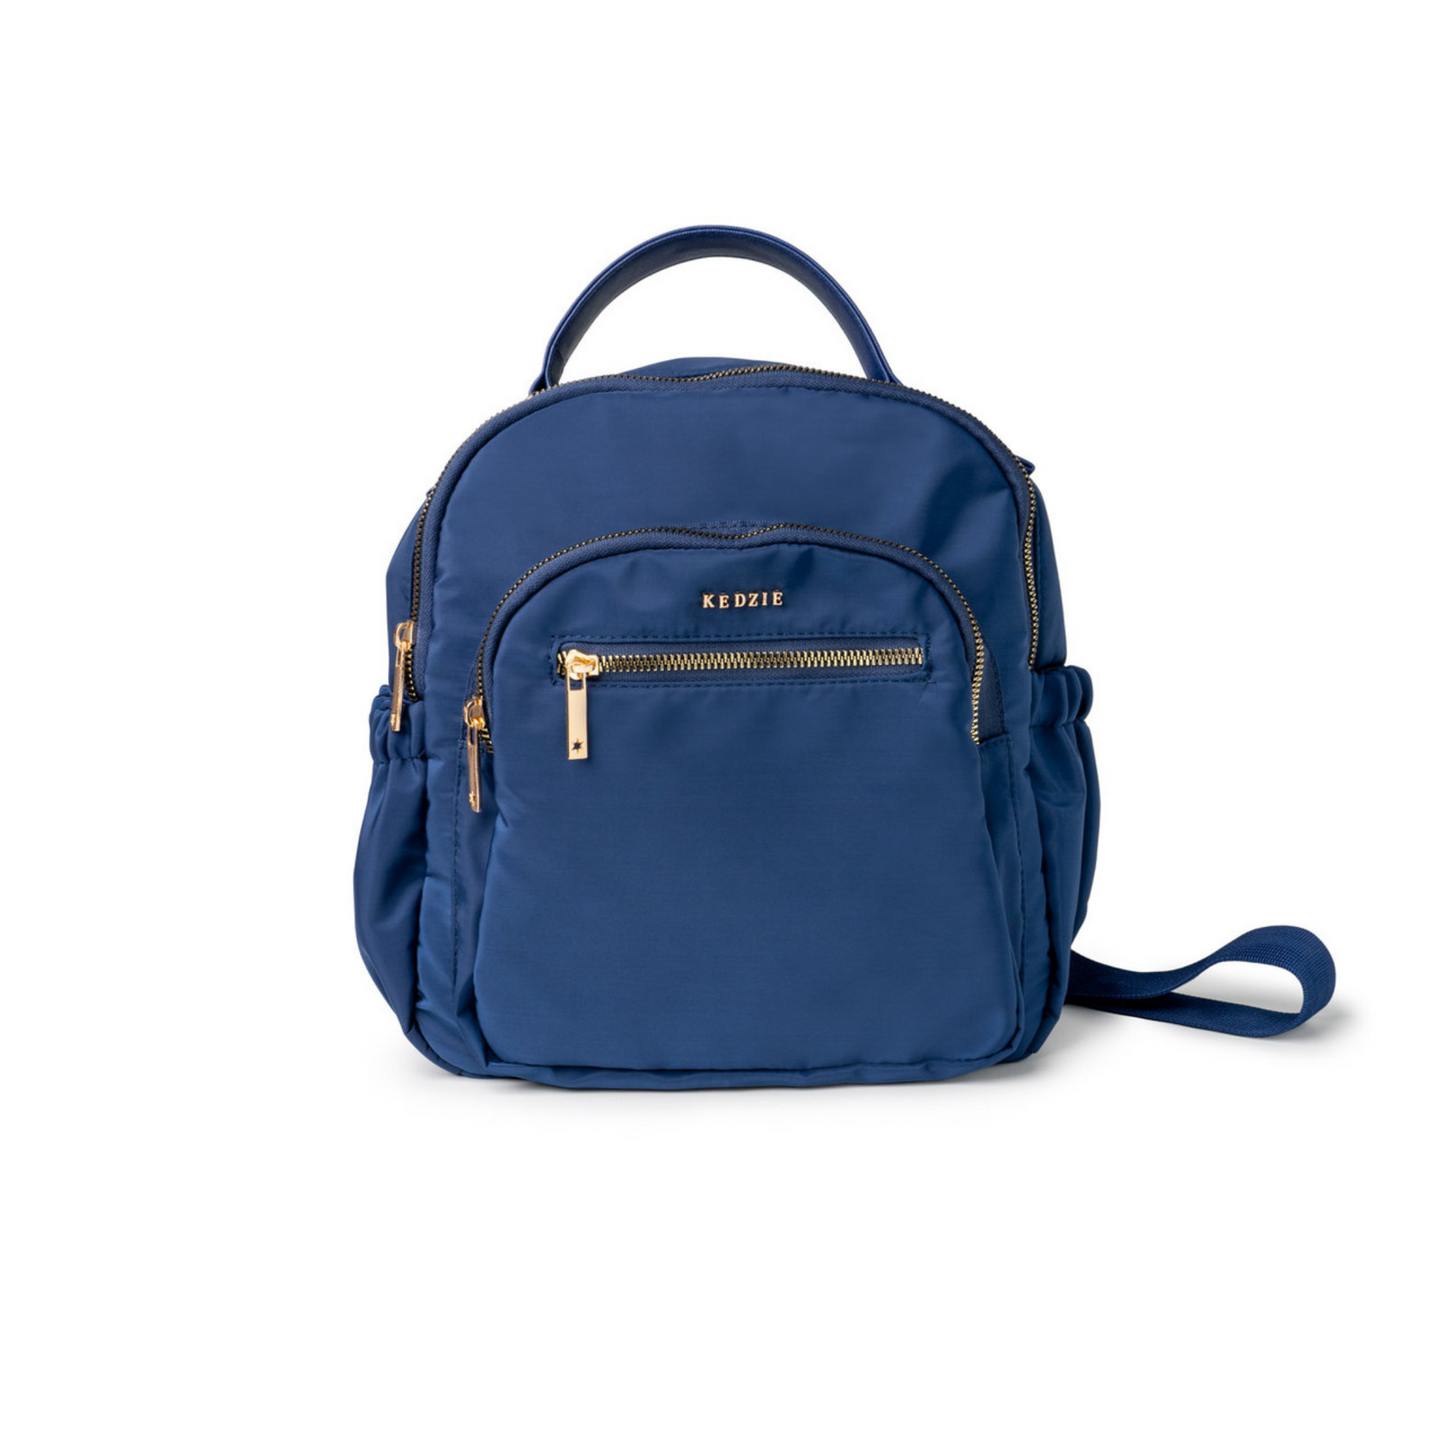 Aire Convertible Backpack in Navy